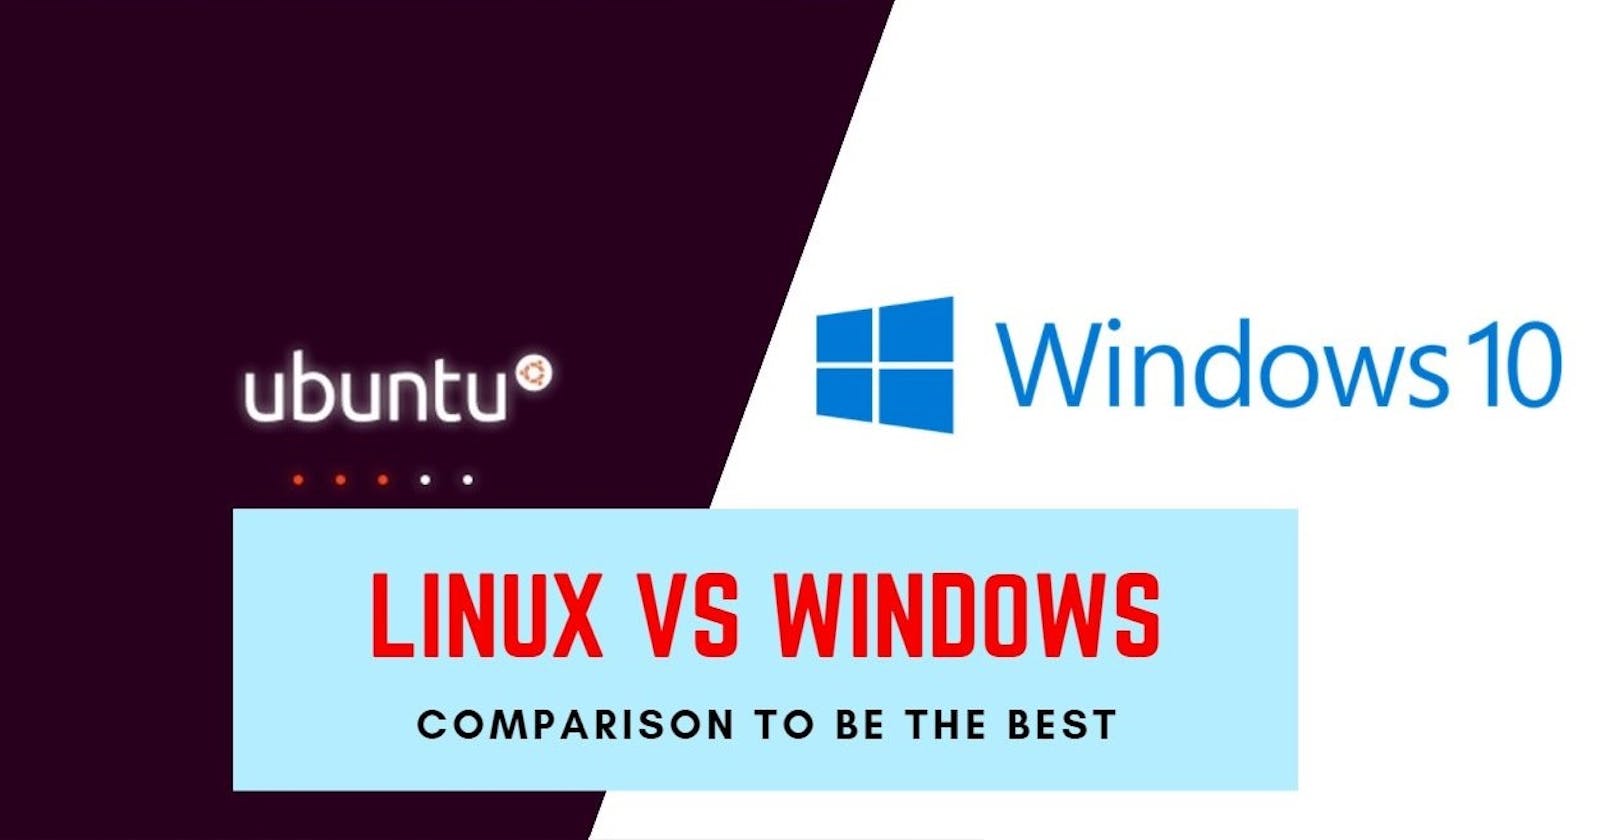 Windows Vs Linux: What to choose?